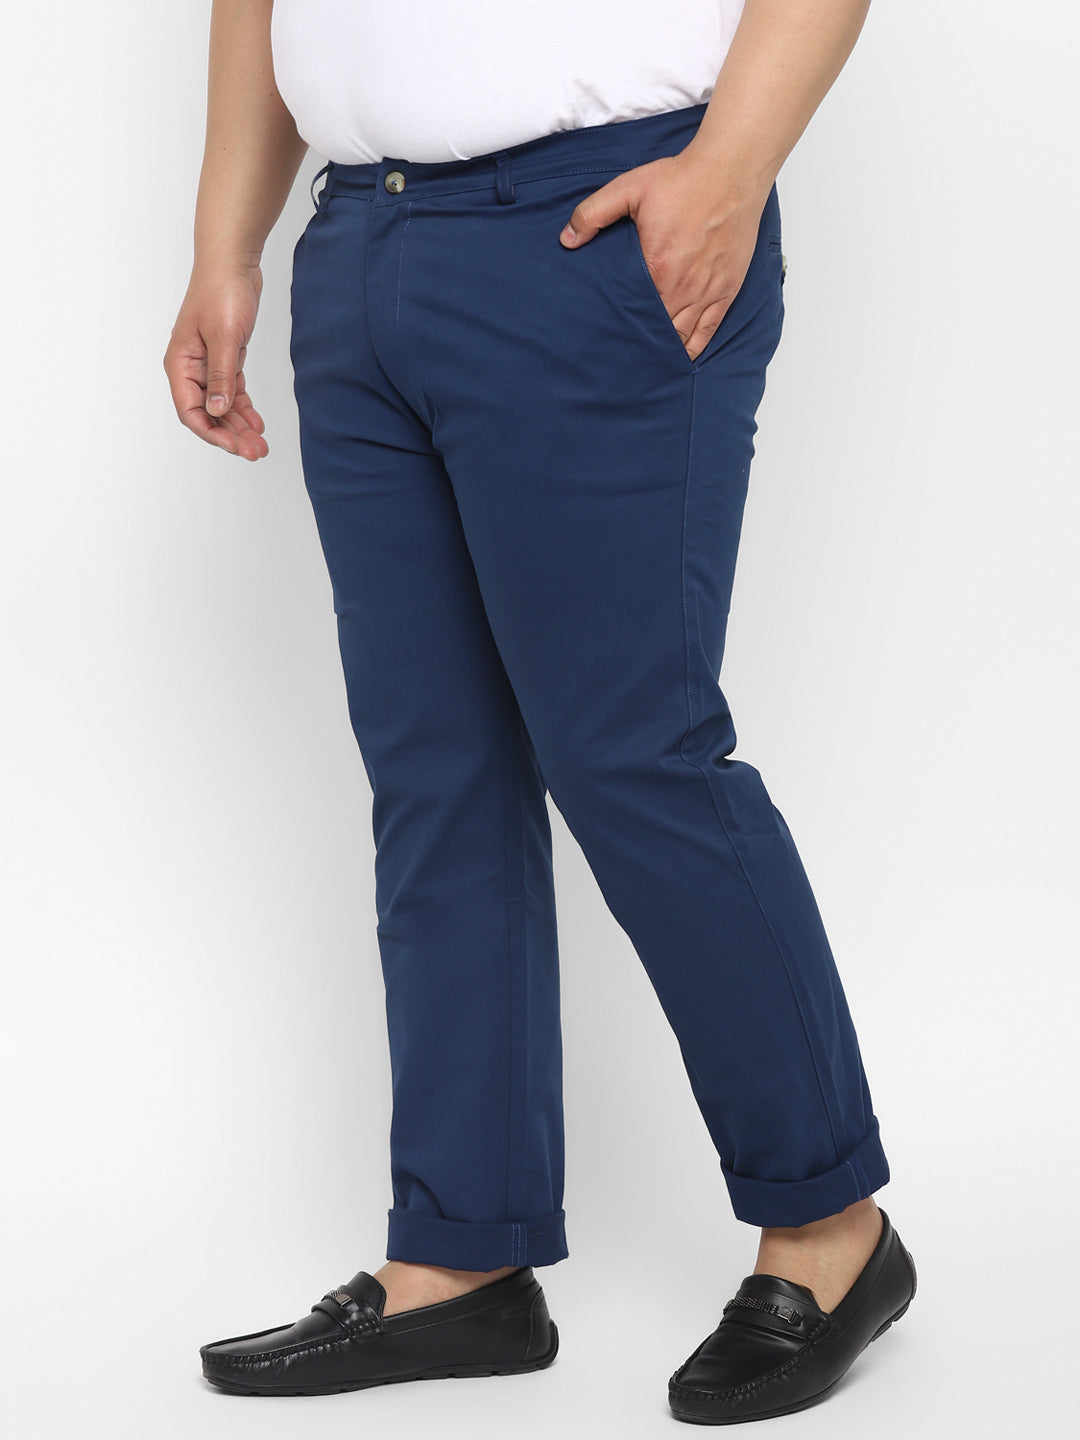 Plus Men's Royal Blue Cotton Regular Fit Casual Chinos Trousers Stretch